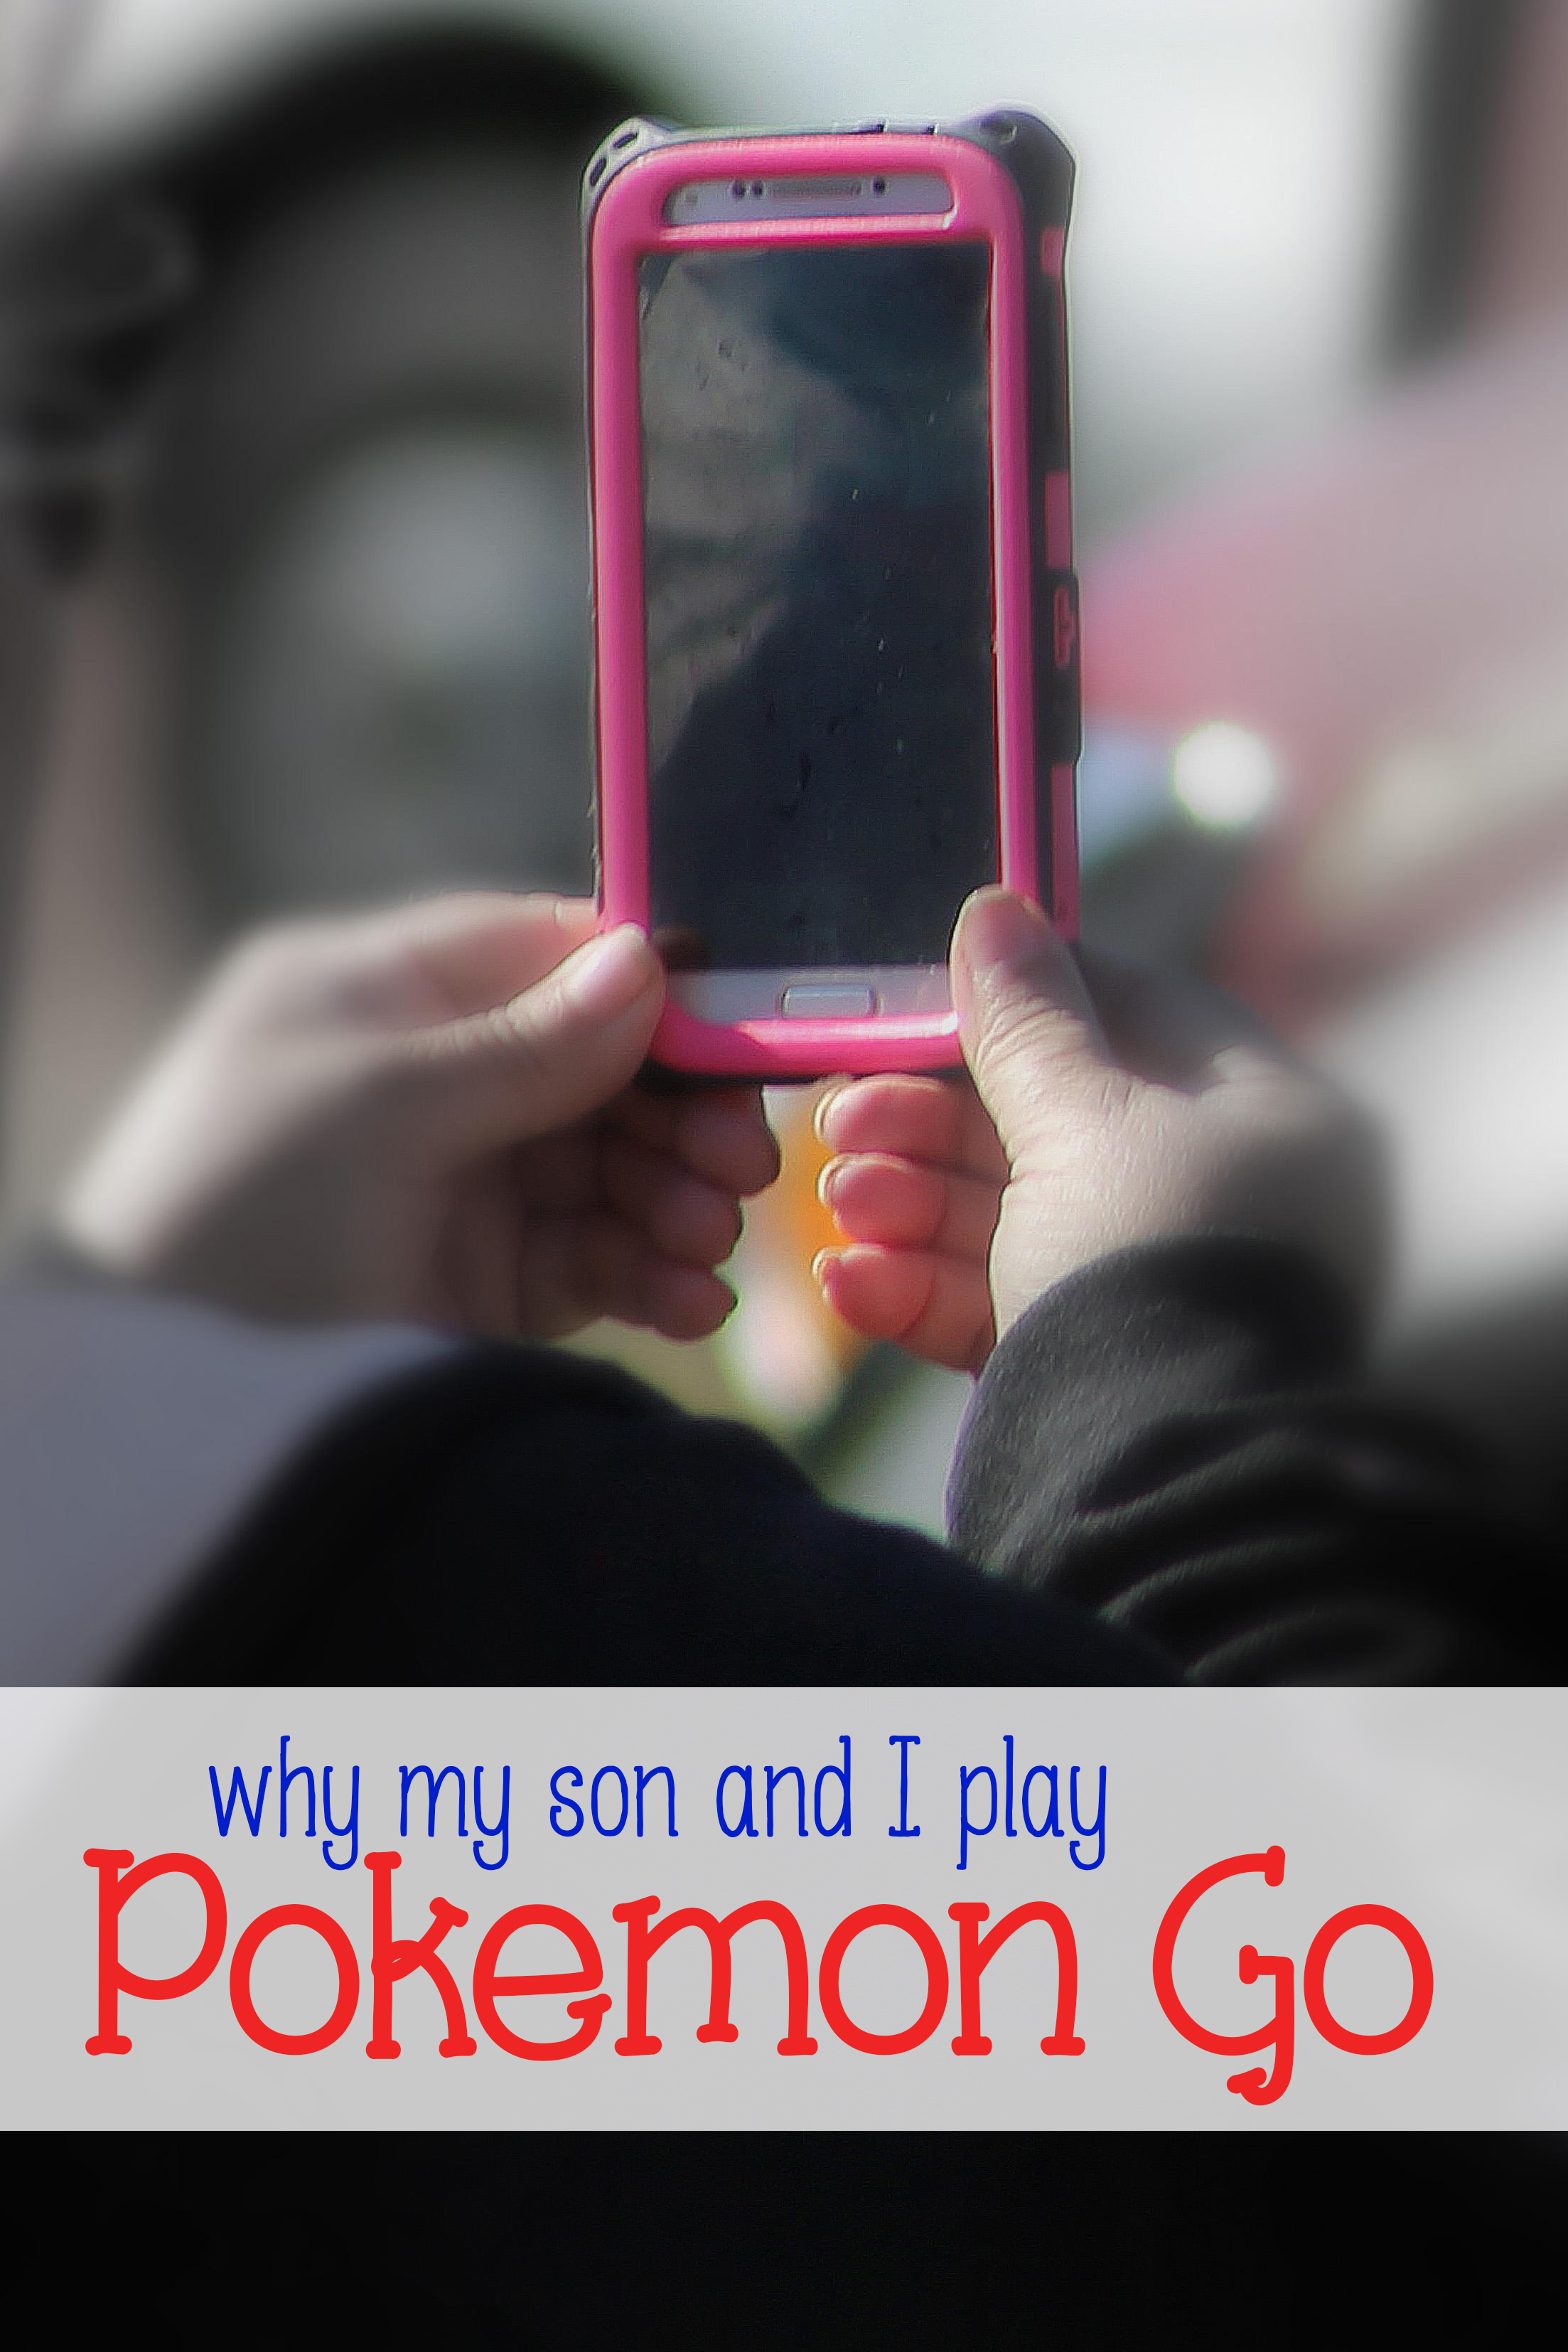 Love it or hate it, there's a lot of great reasons to get your kids interested in playing PokemonGo! From exercise to family bonding, here are the reasons my son and I play this cell phone app video game together.